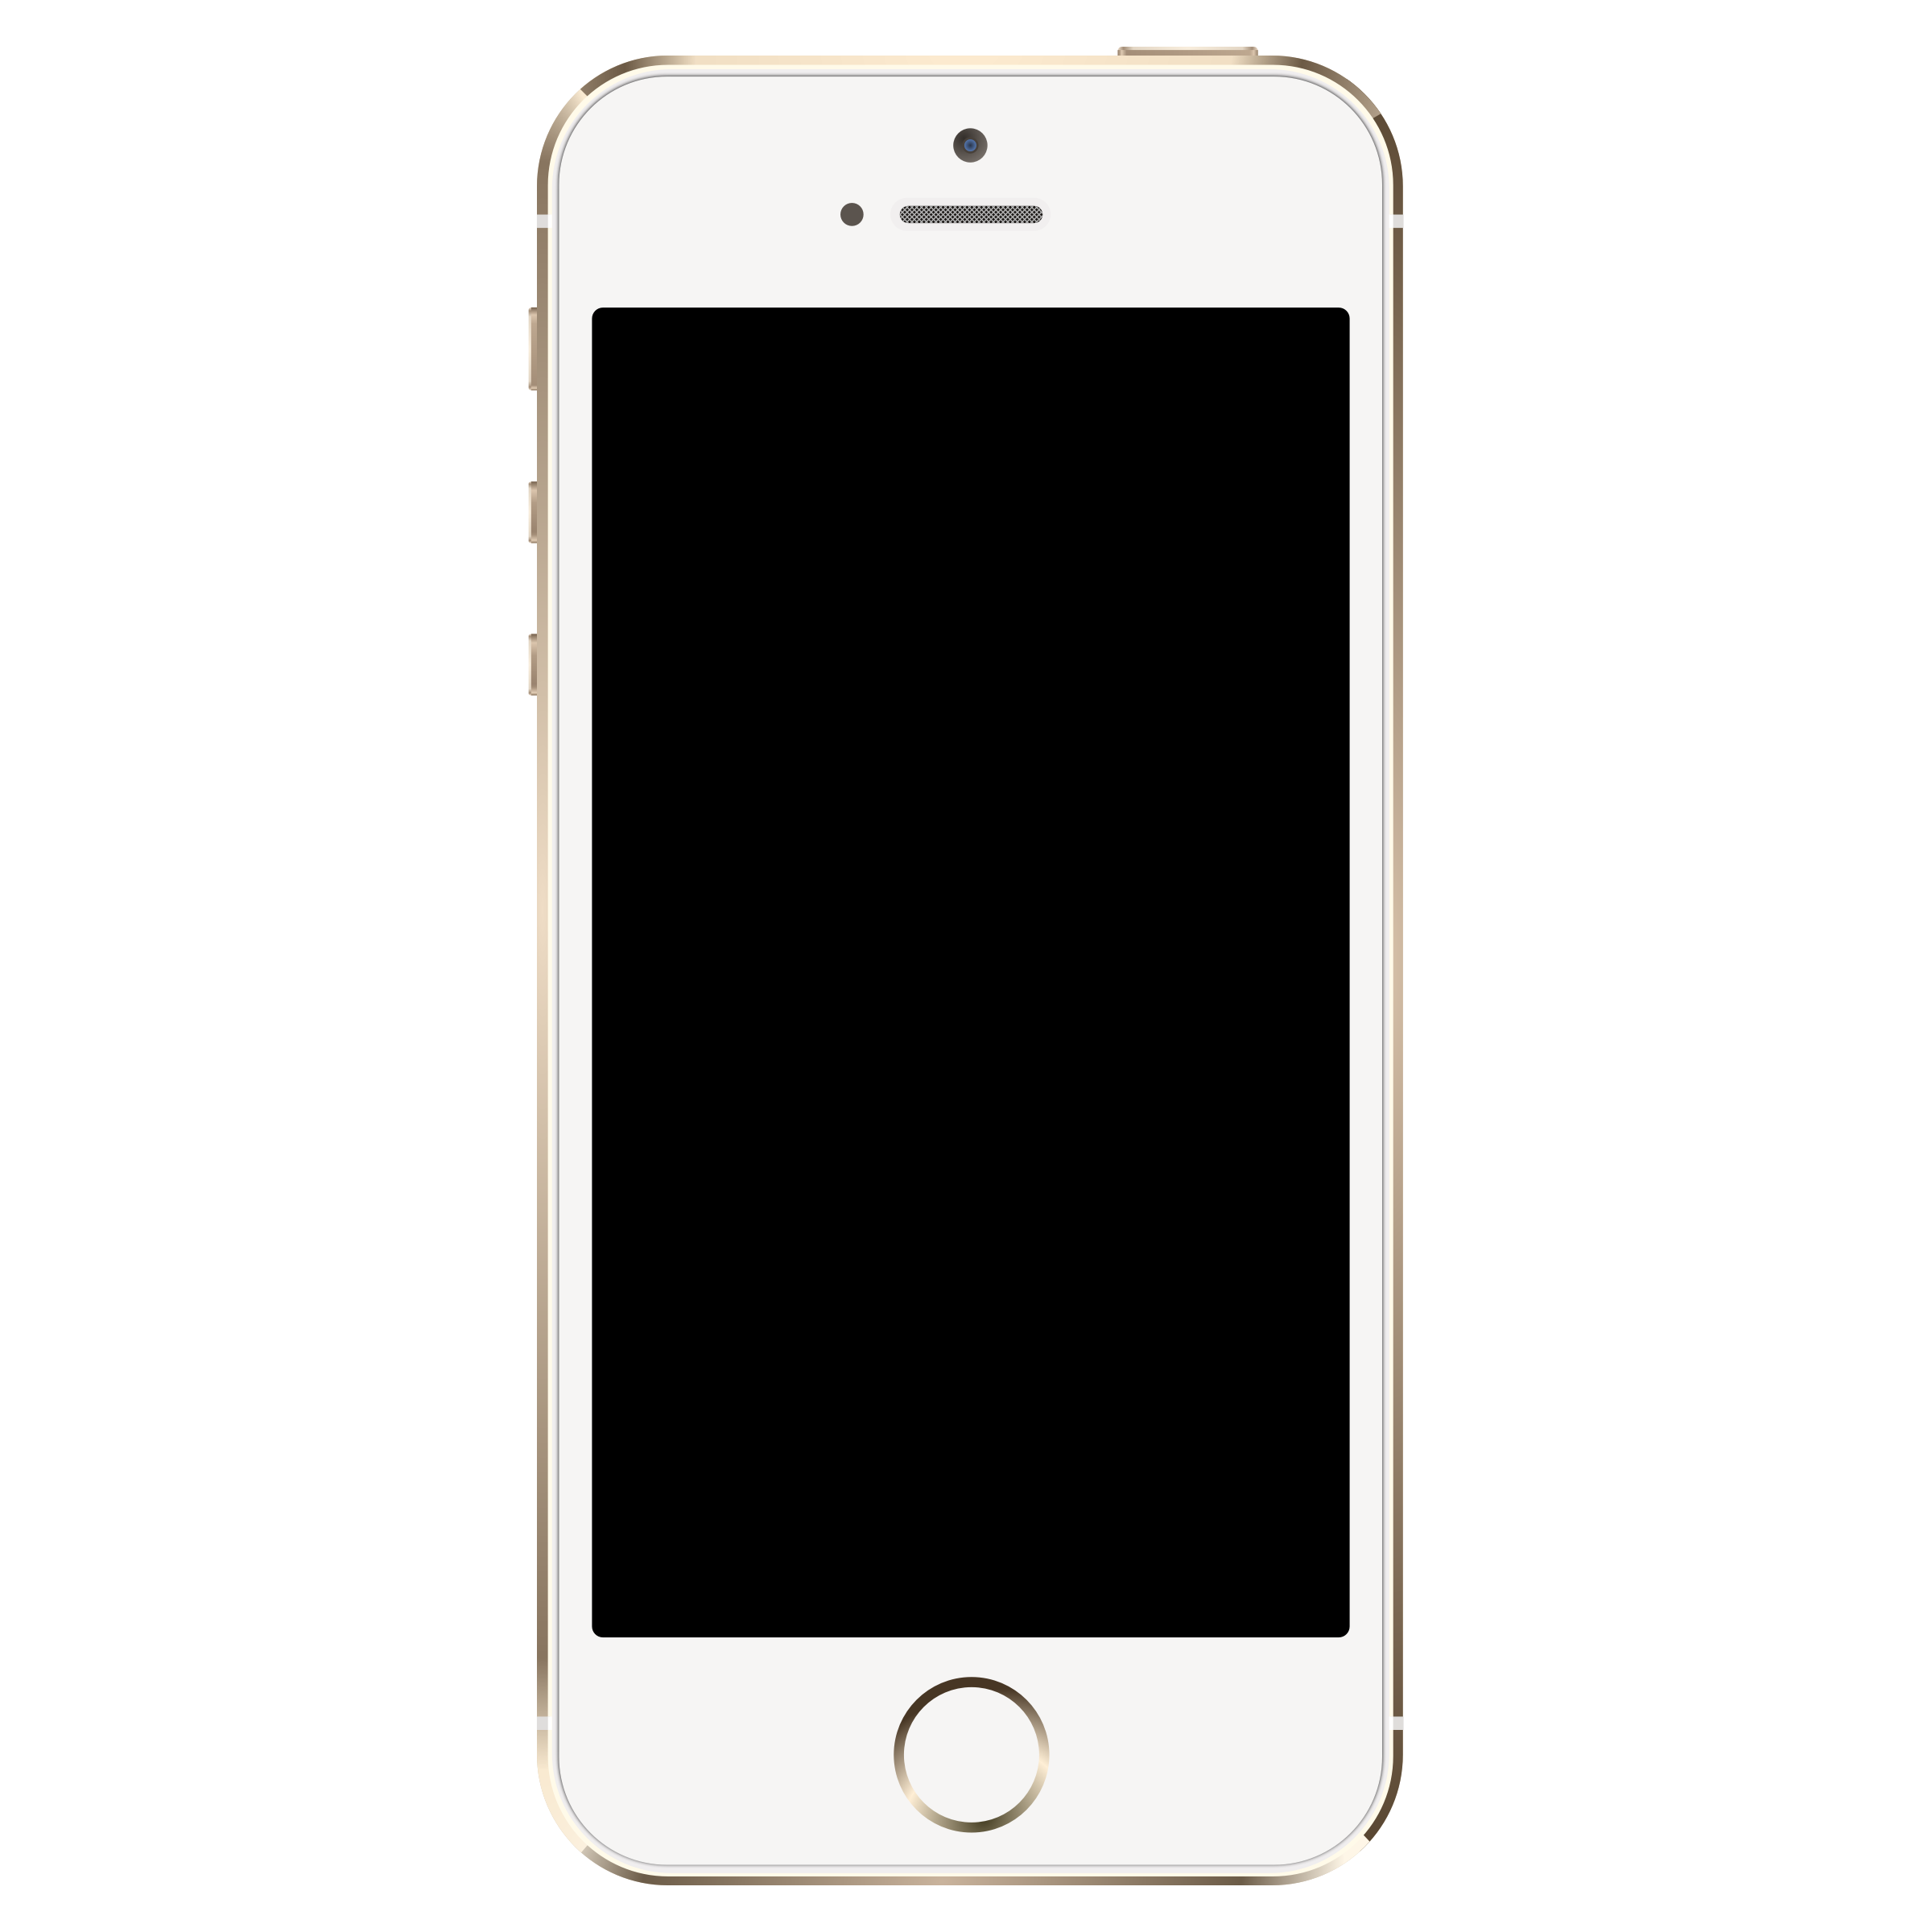 iphone clipart mobile device